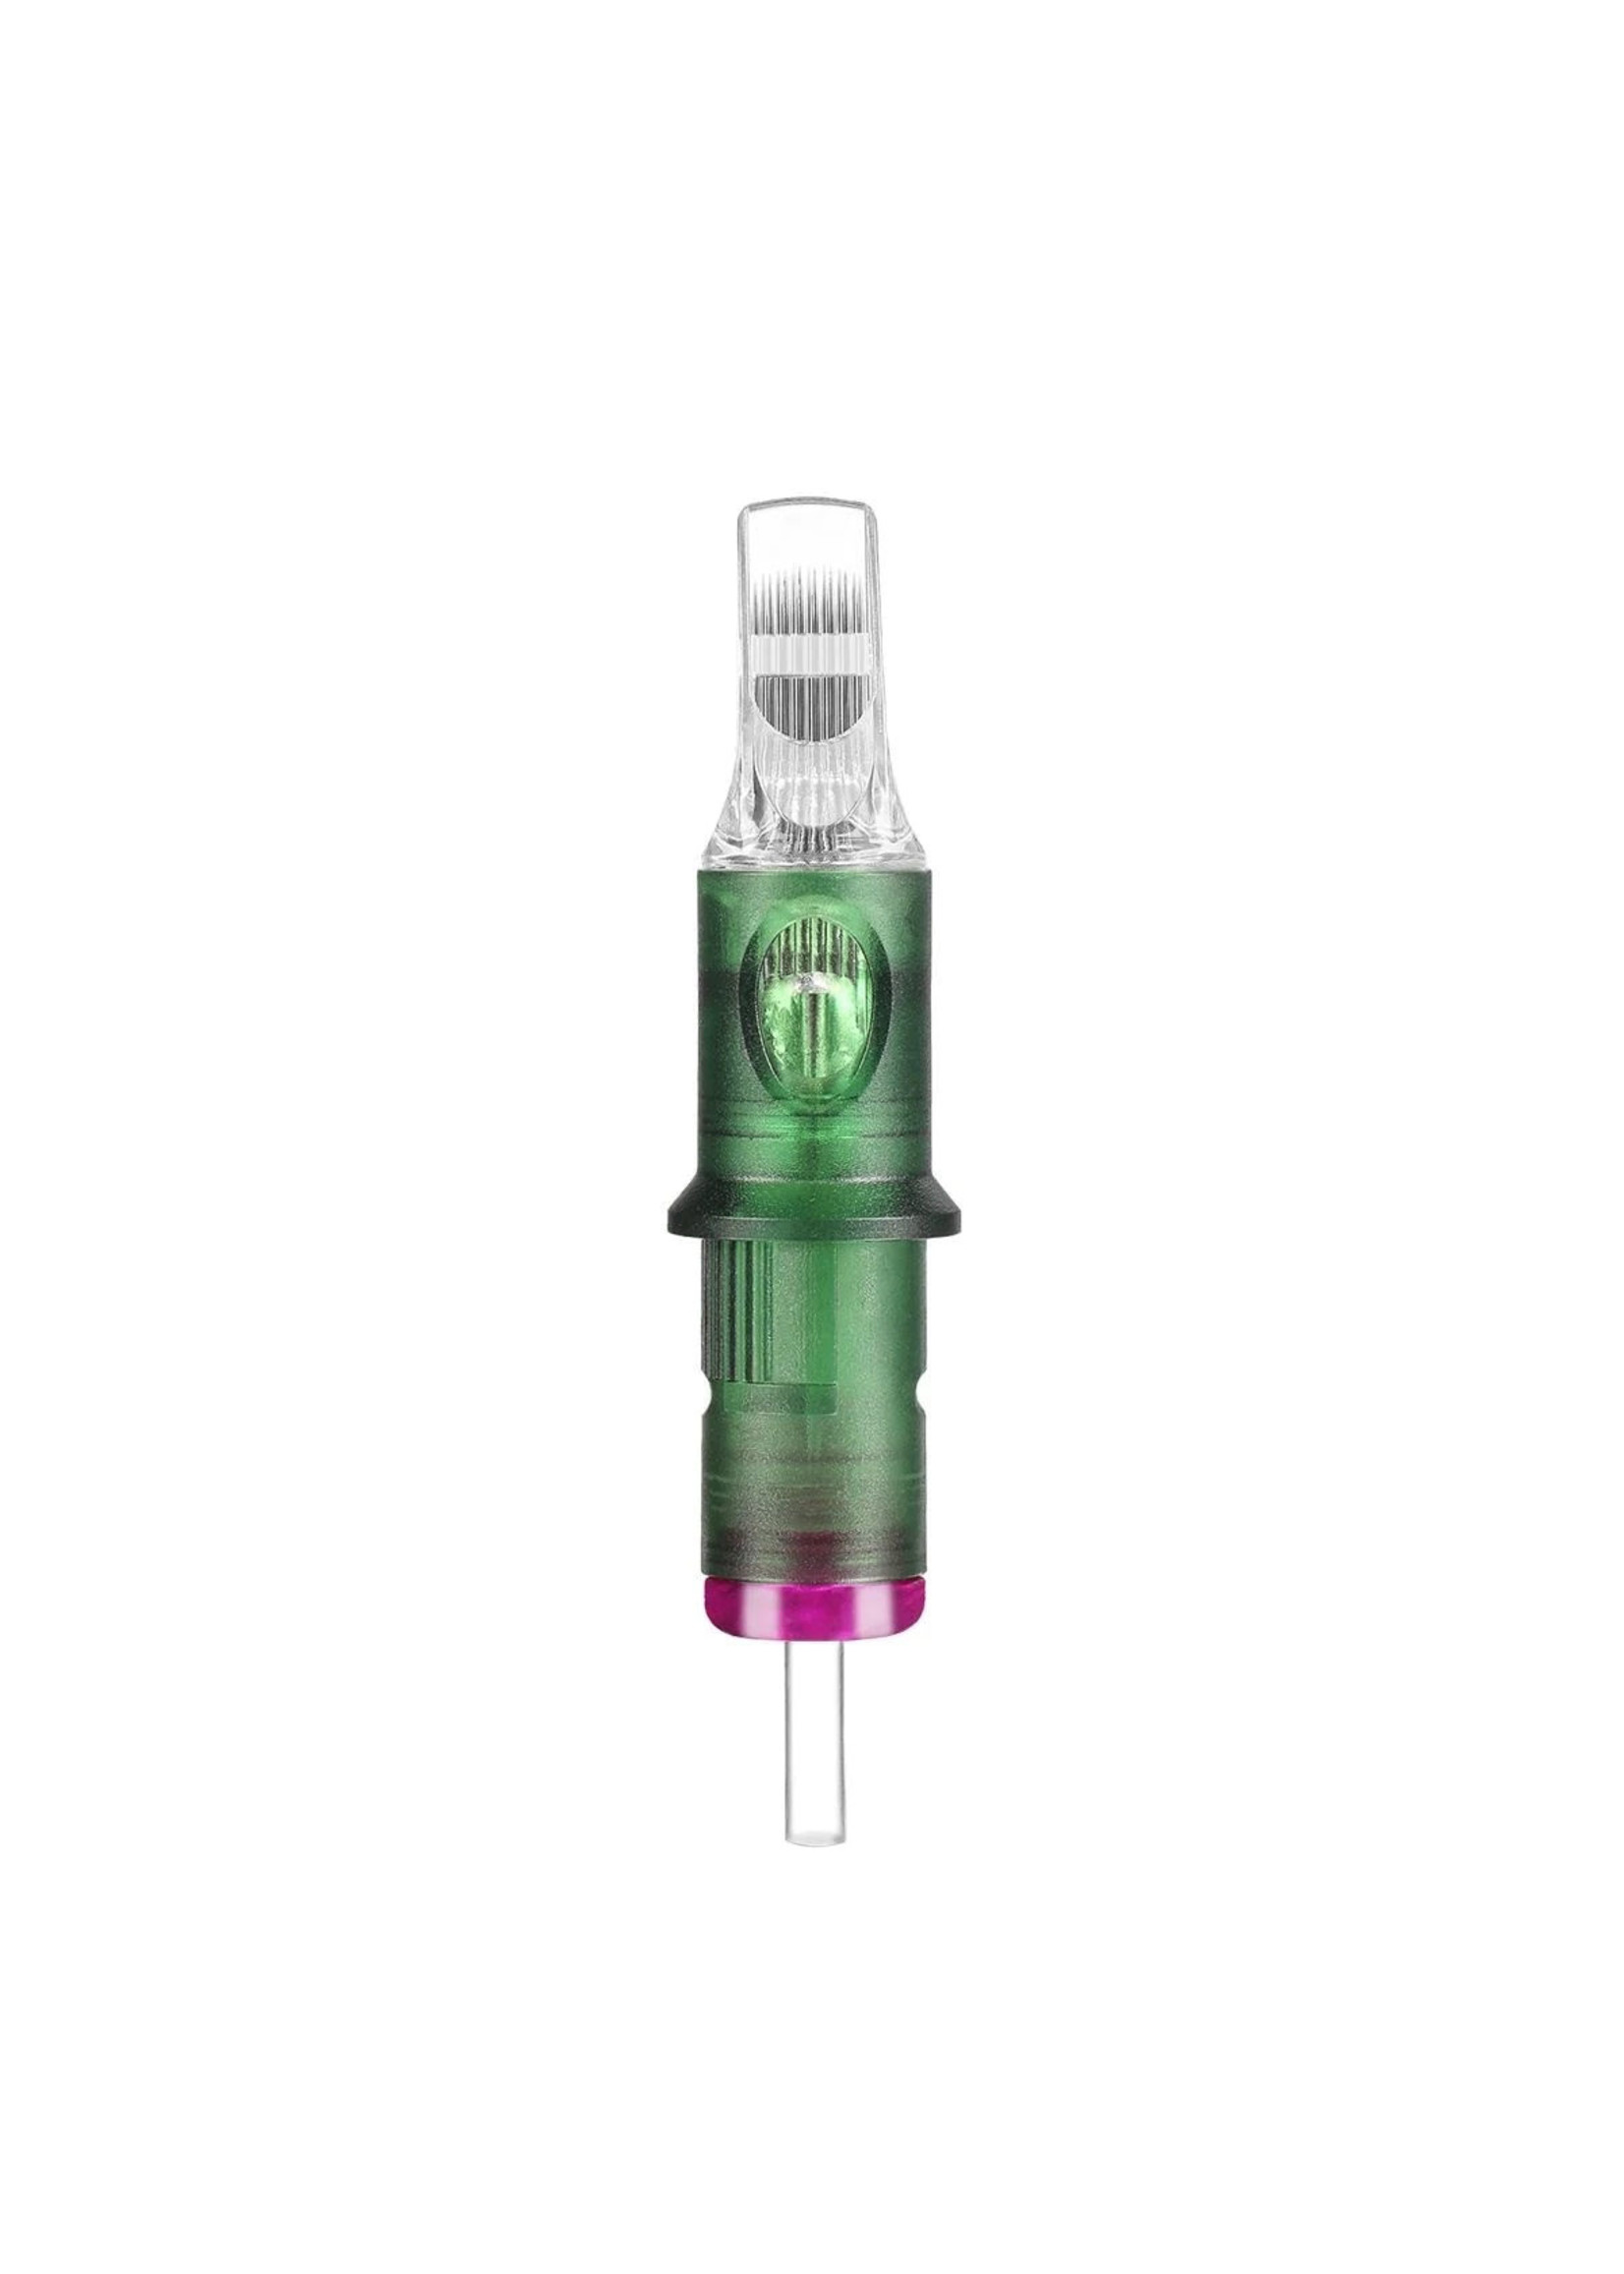 Artistic Tattoo Supply Inc. Artistic Tattoo Supply - ATS Green - Needle Cartridge - DC1213CMM - Great for Color - Closed - 0.35mm - Curved Magnum- Medium Taper - Box of 20pcs